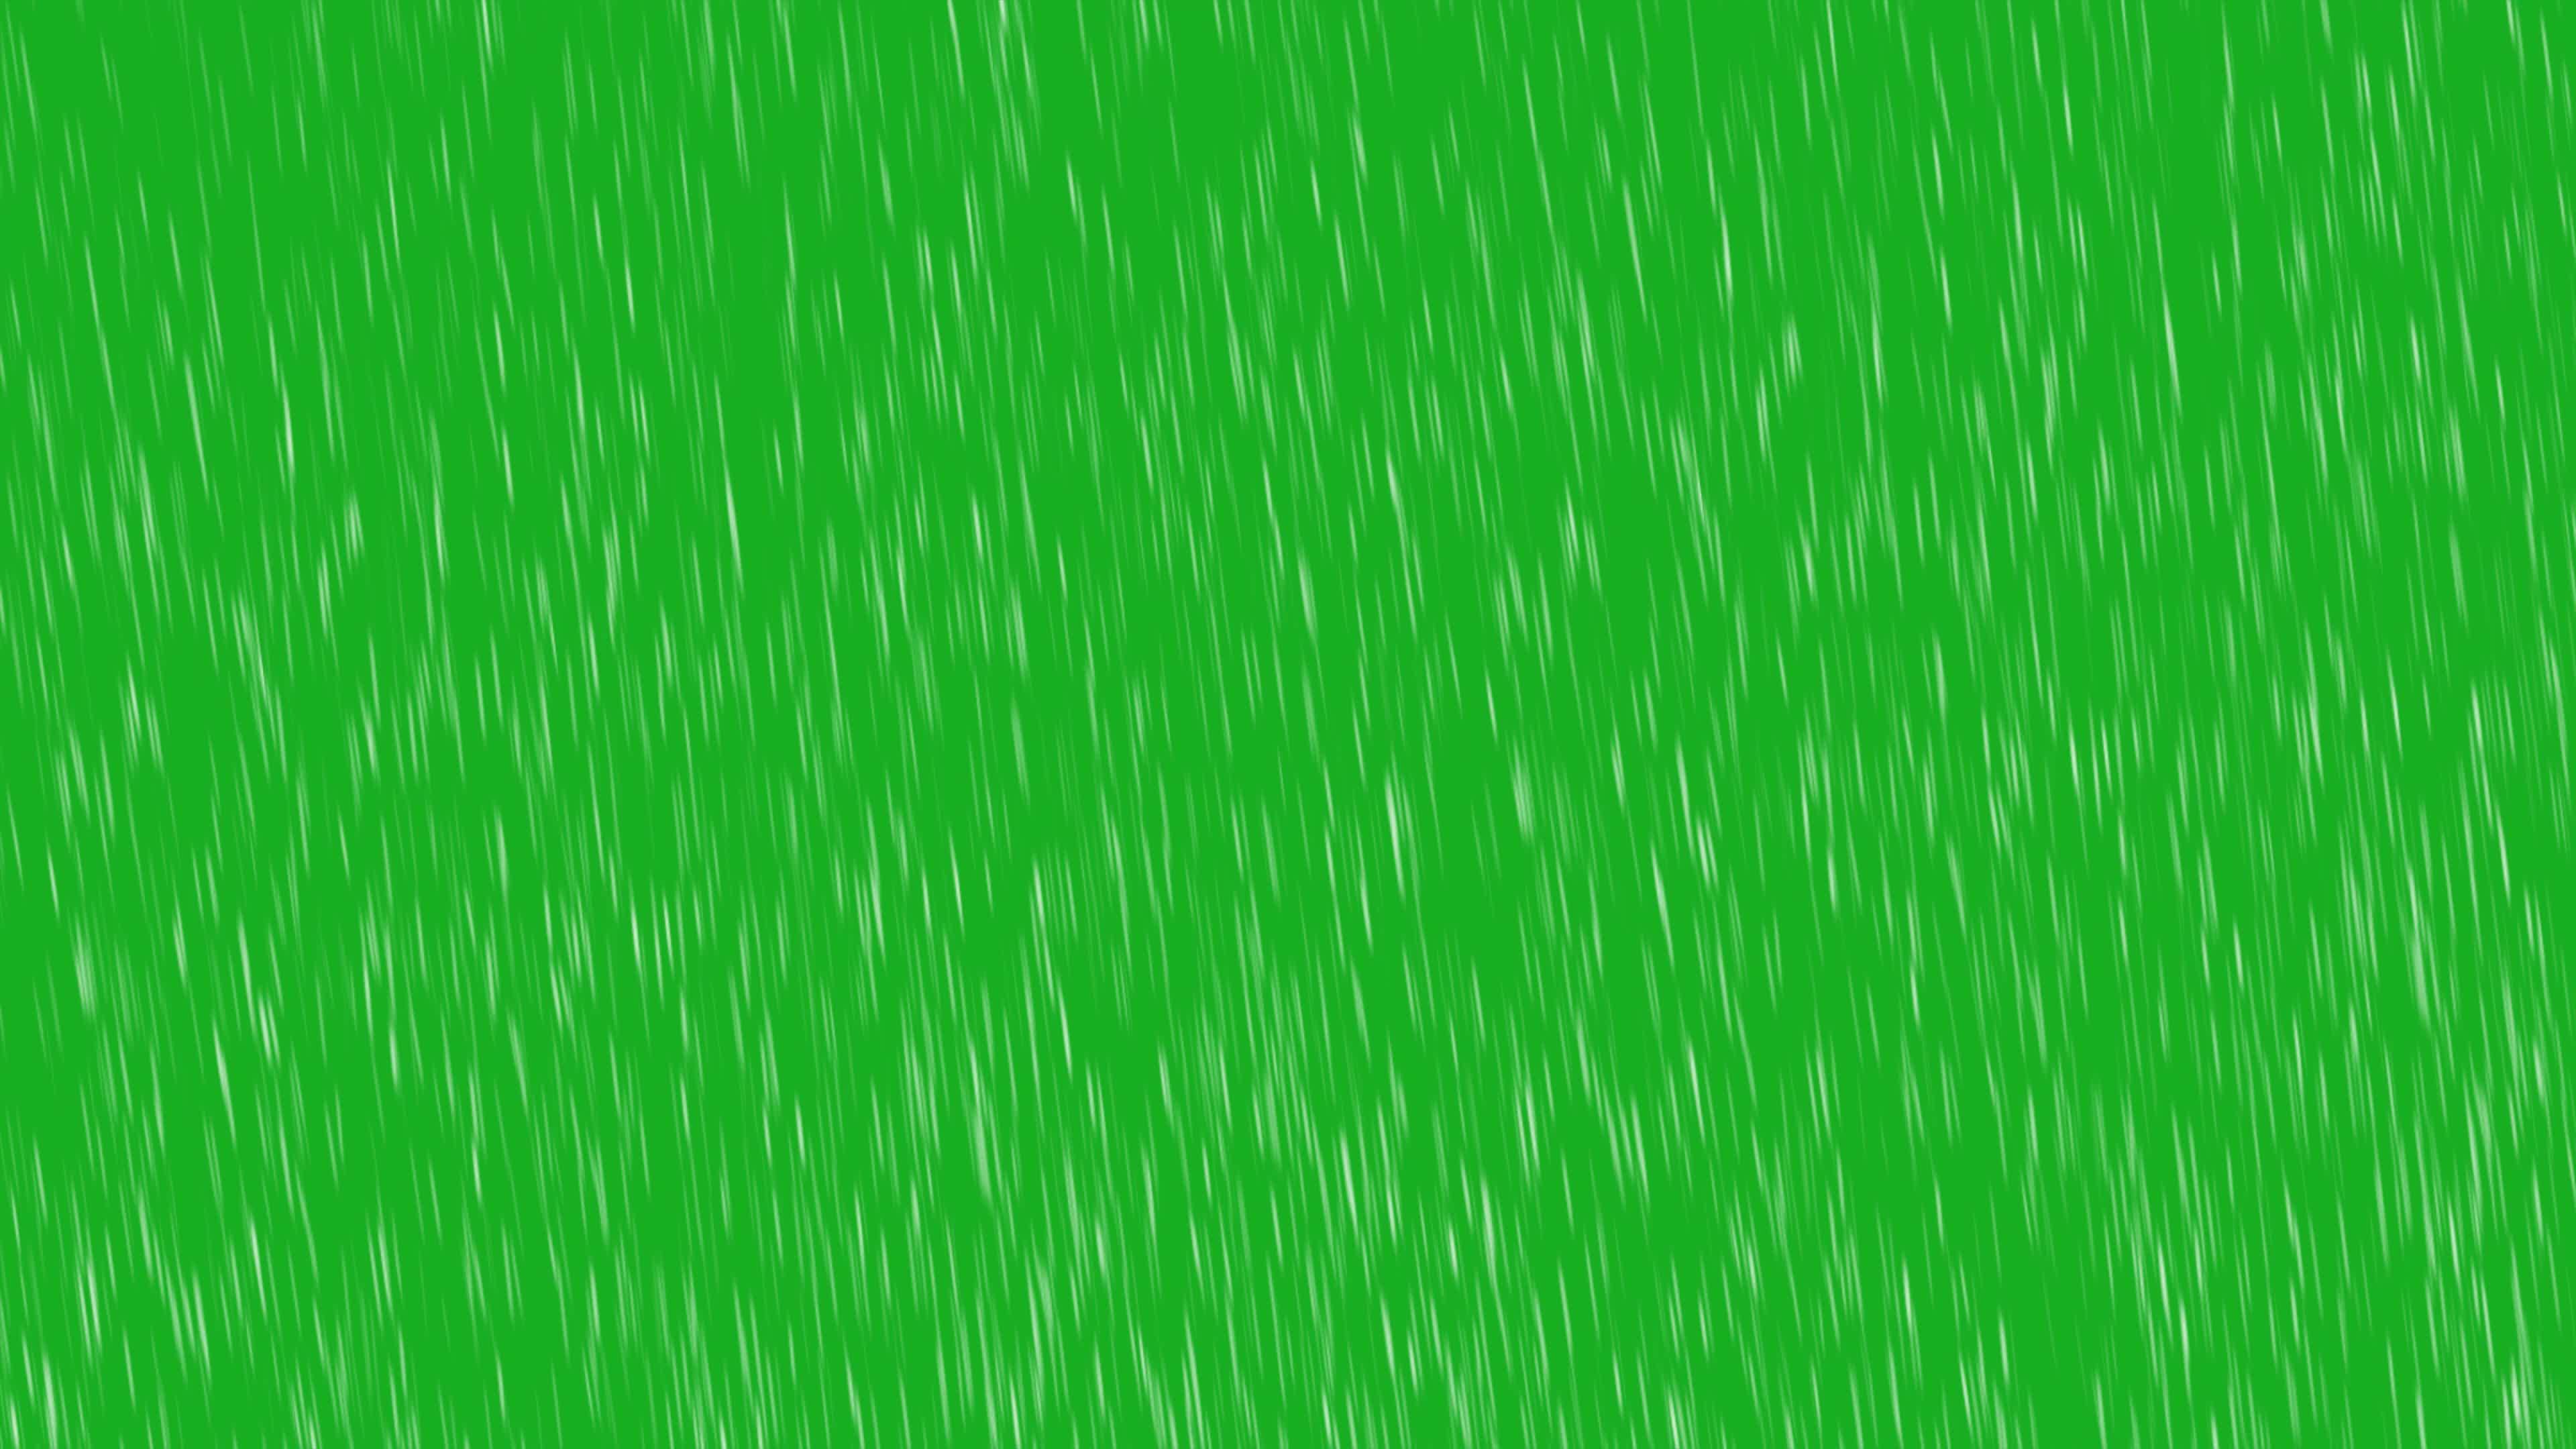 Green Screen Background Stock Video Footage for Free Download